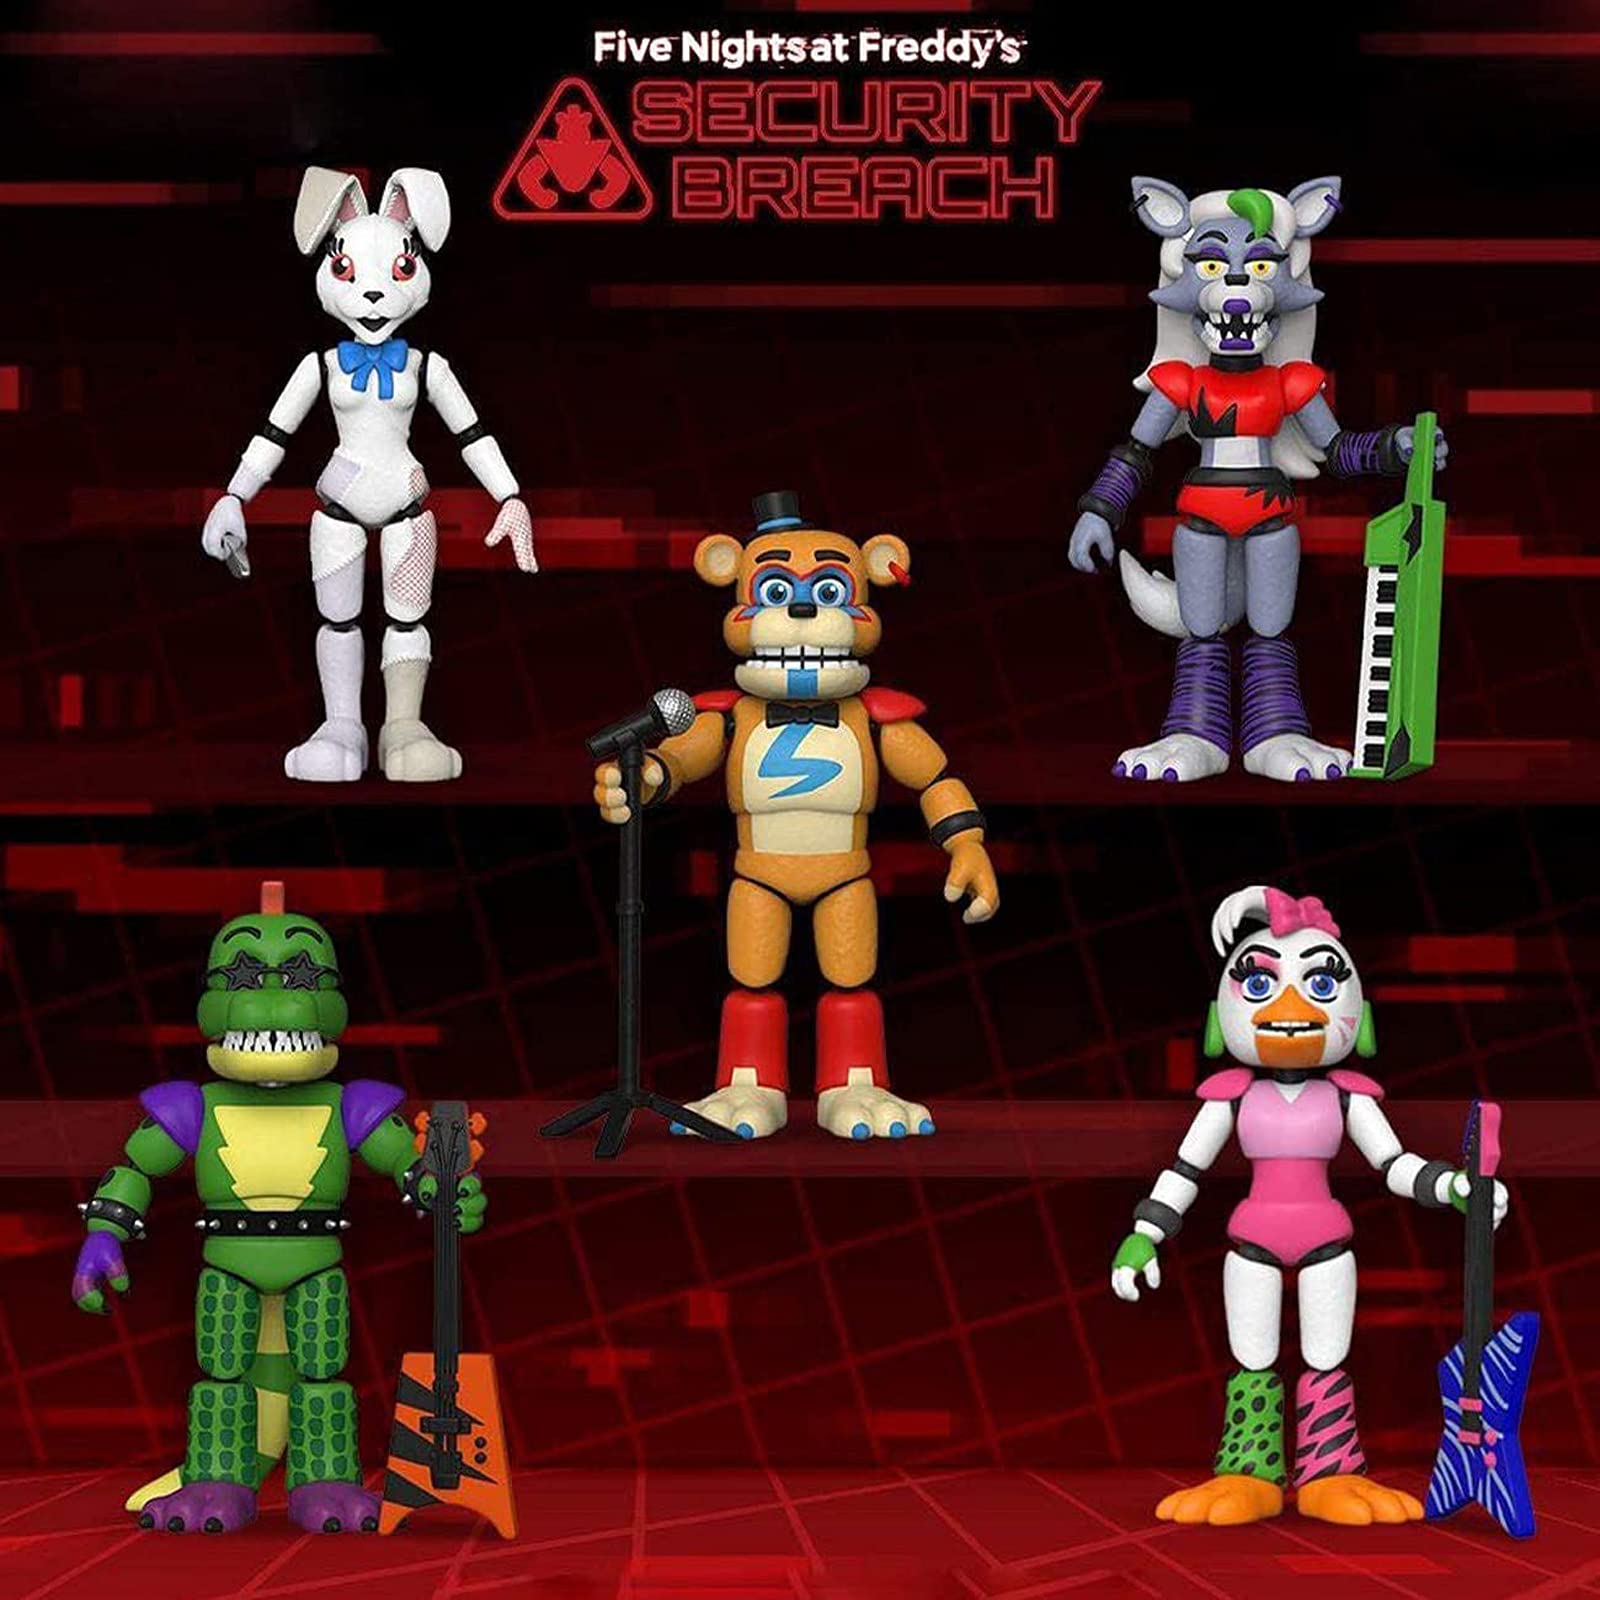 Five Nights at Freddys Sister Location Fredbears Family Diner Freddy  Fazbears Pizzeria Simulator Five Nights at Freddys 4  thế giới hoạt hình  png fnaf png tải về  Miễn phí trong